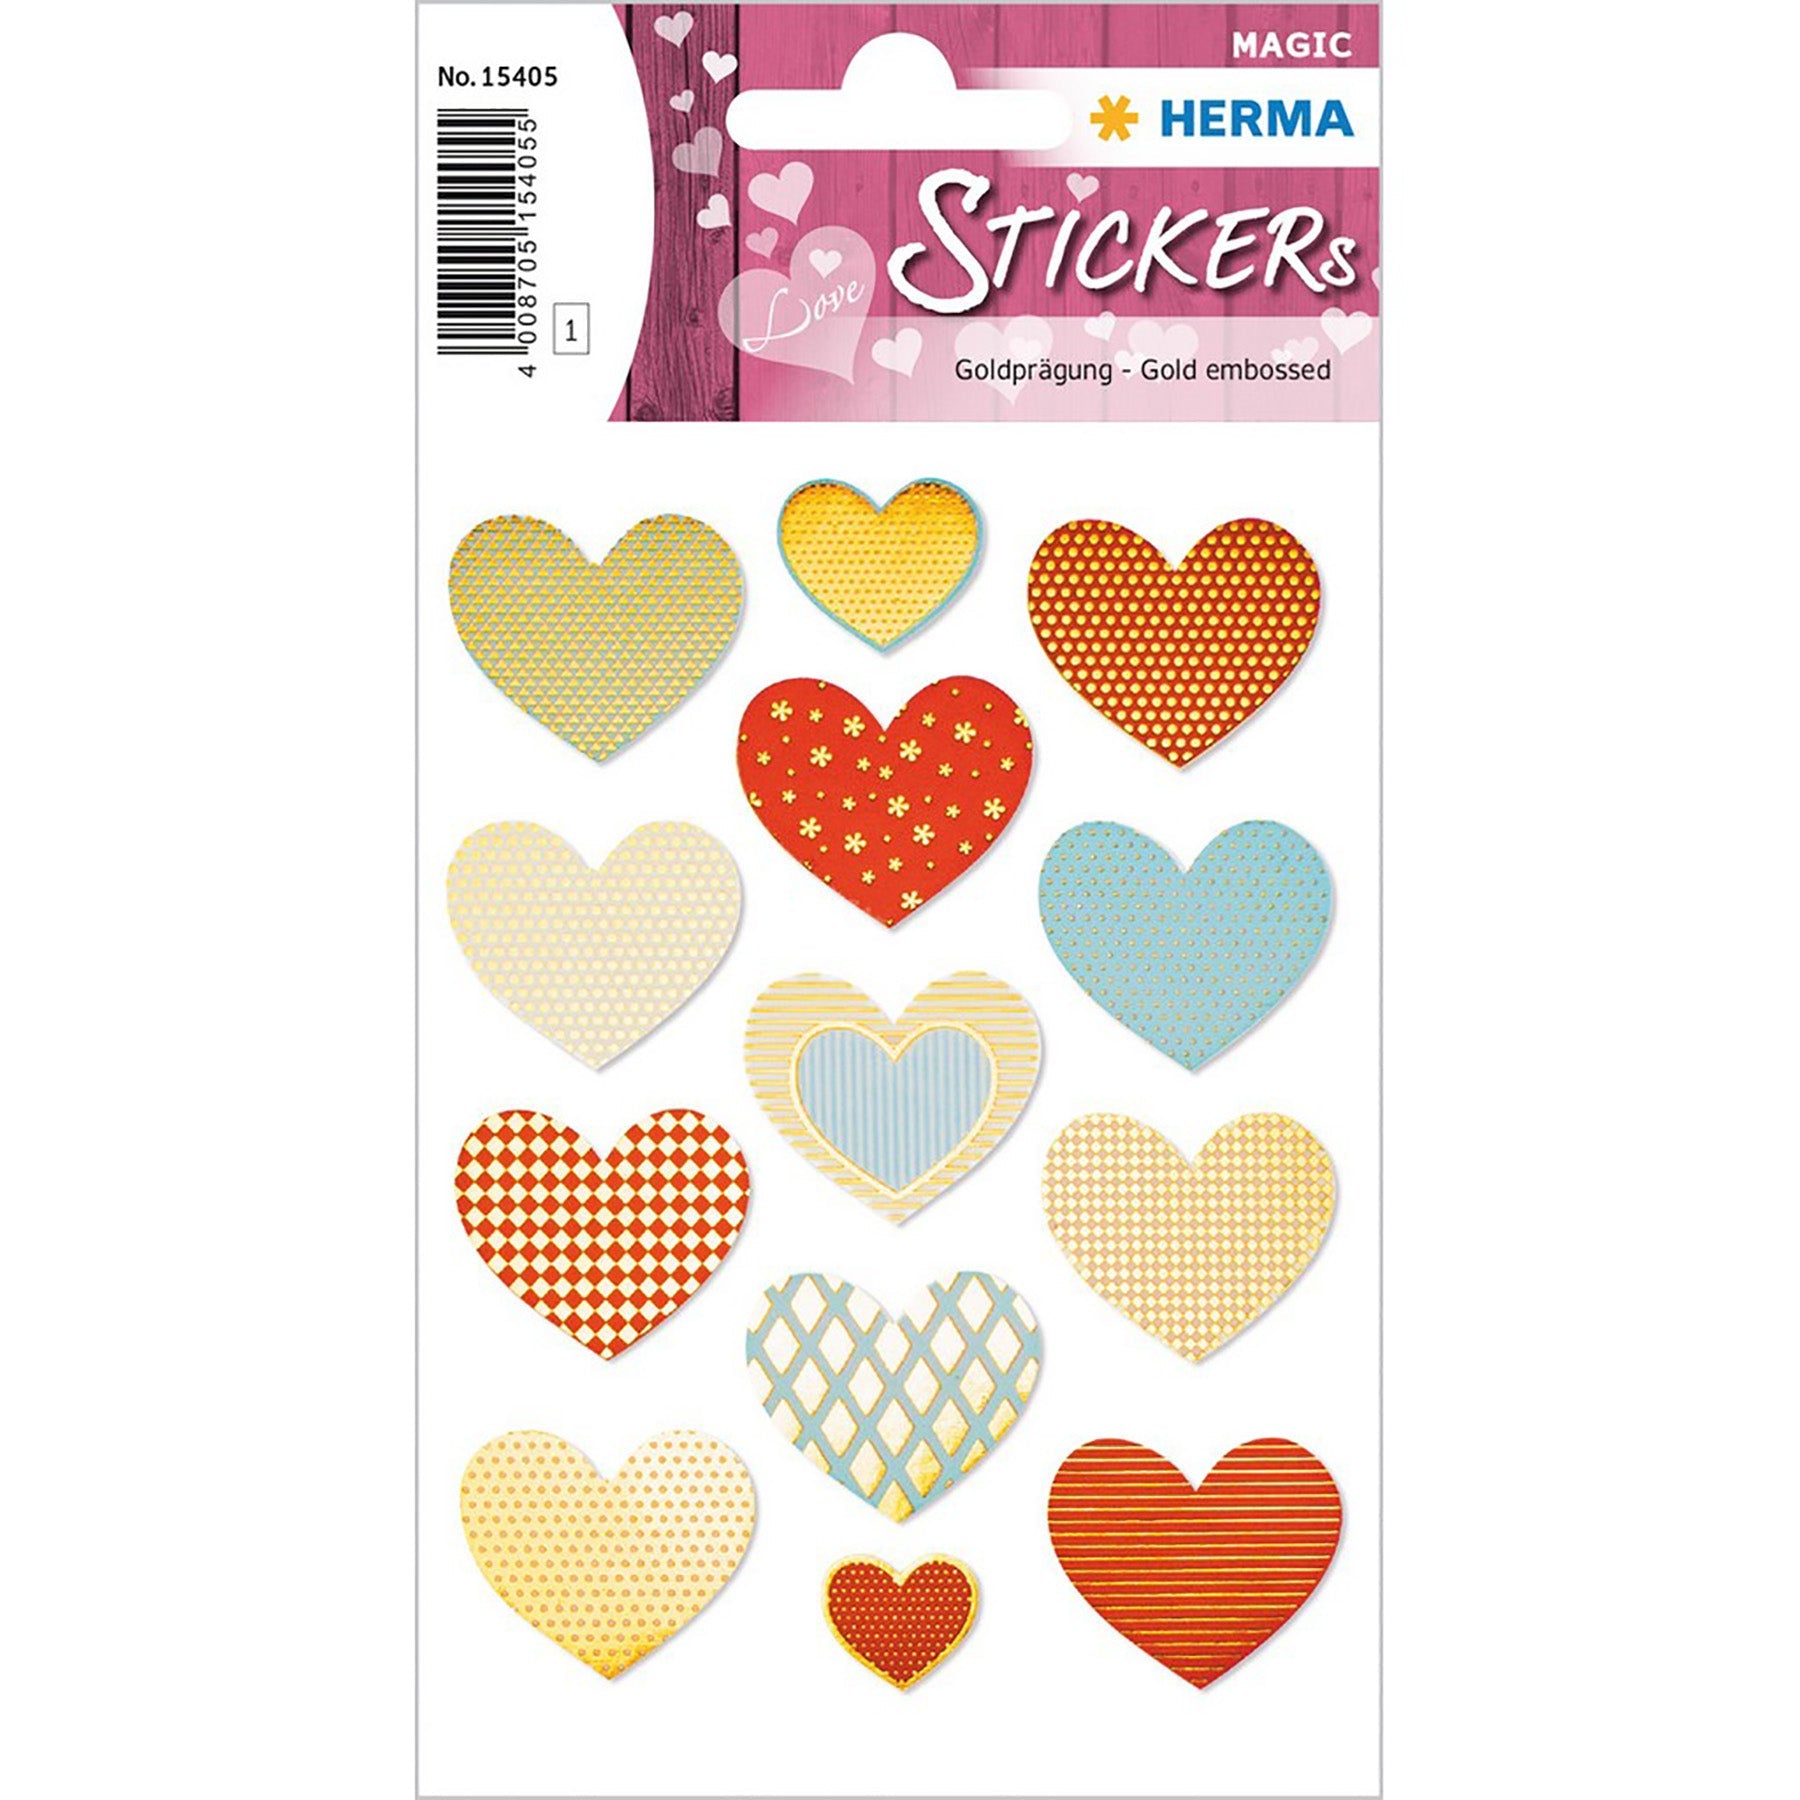 Herma Magic Stickers Golden Hearts Gold Embossed 4.75x3.1in Sheet